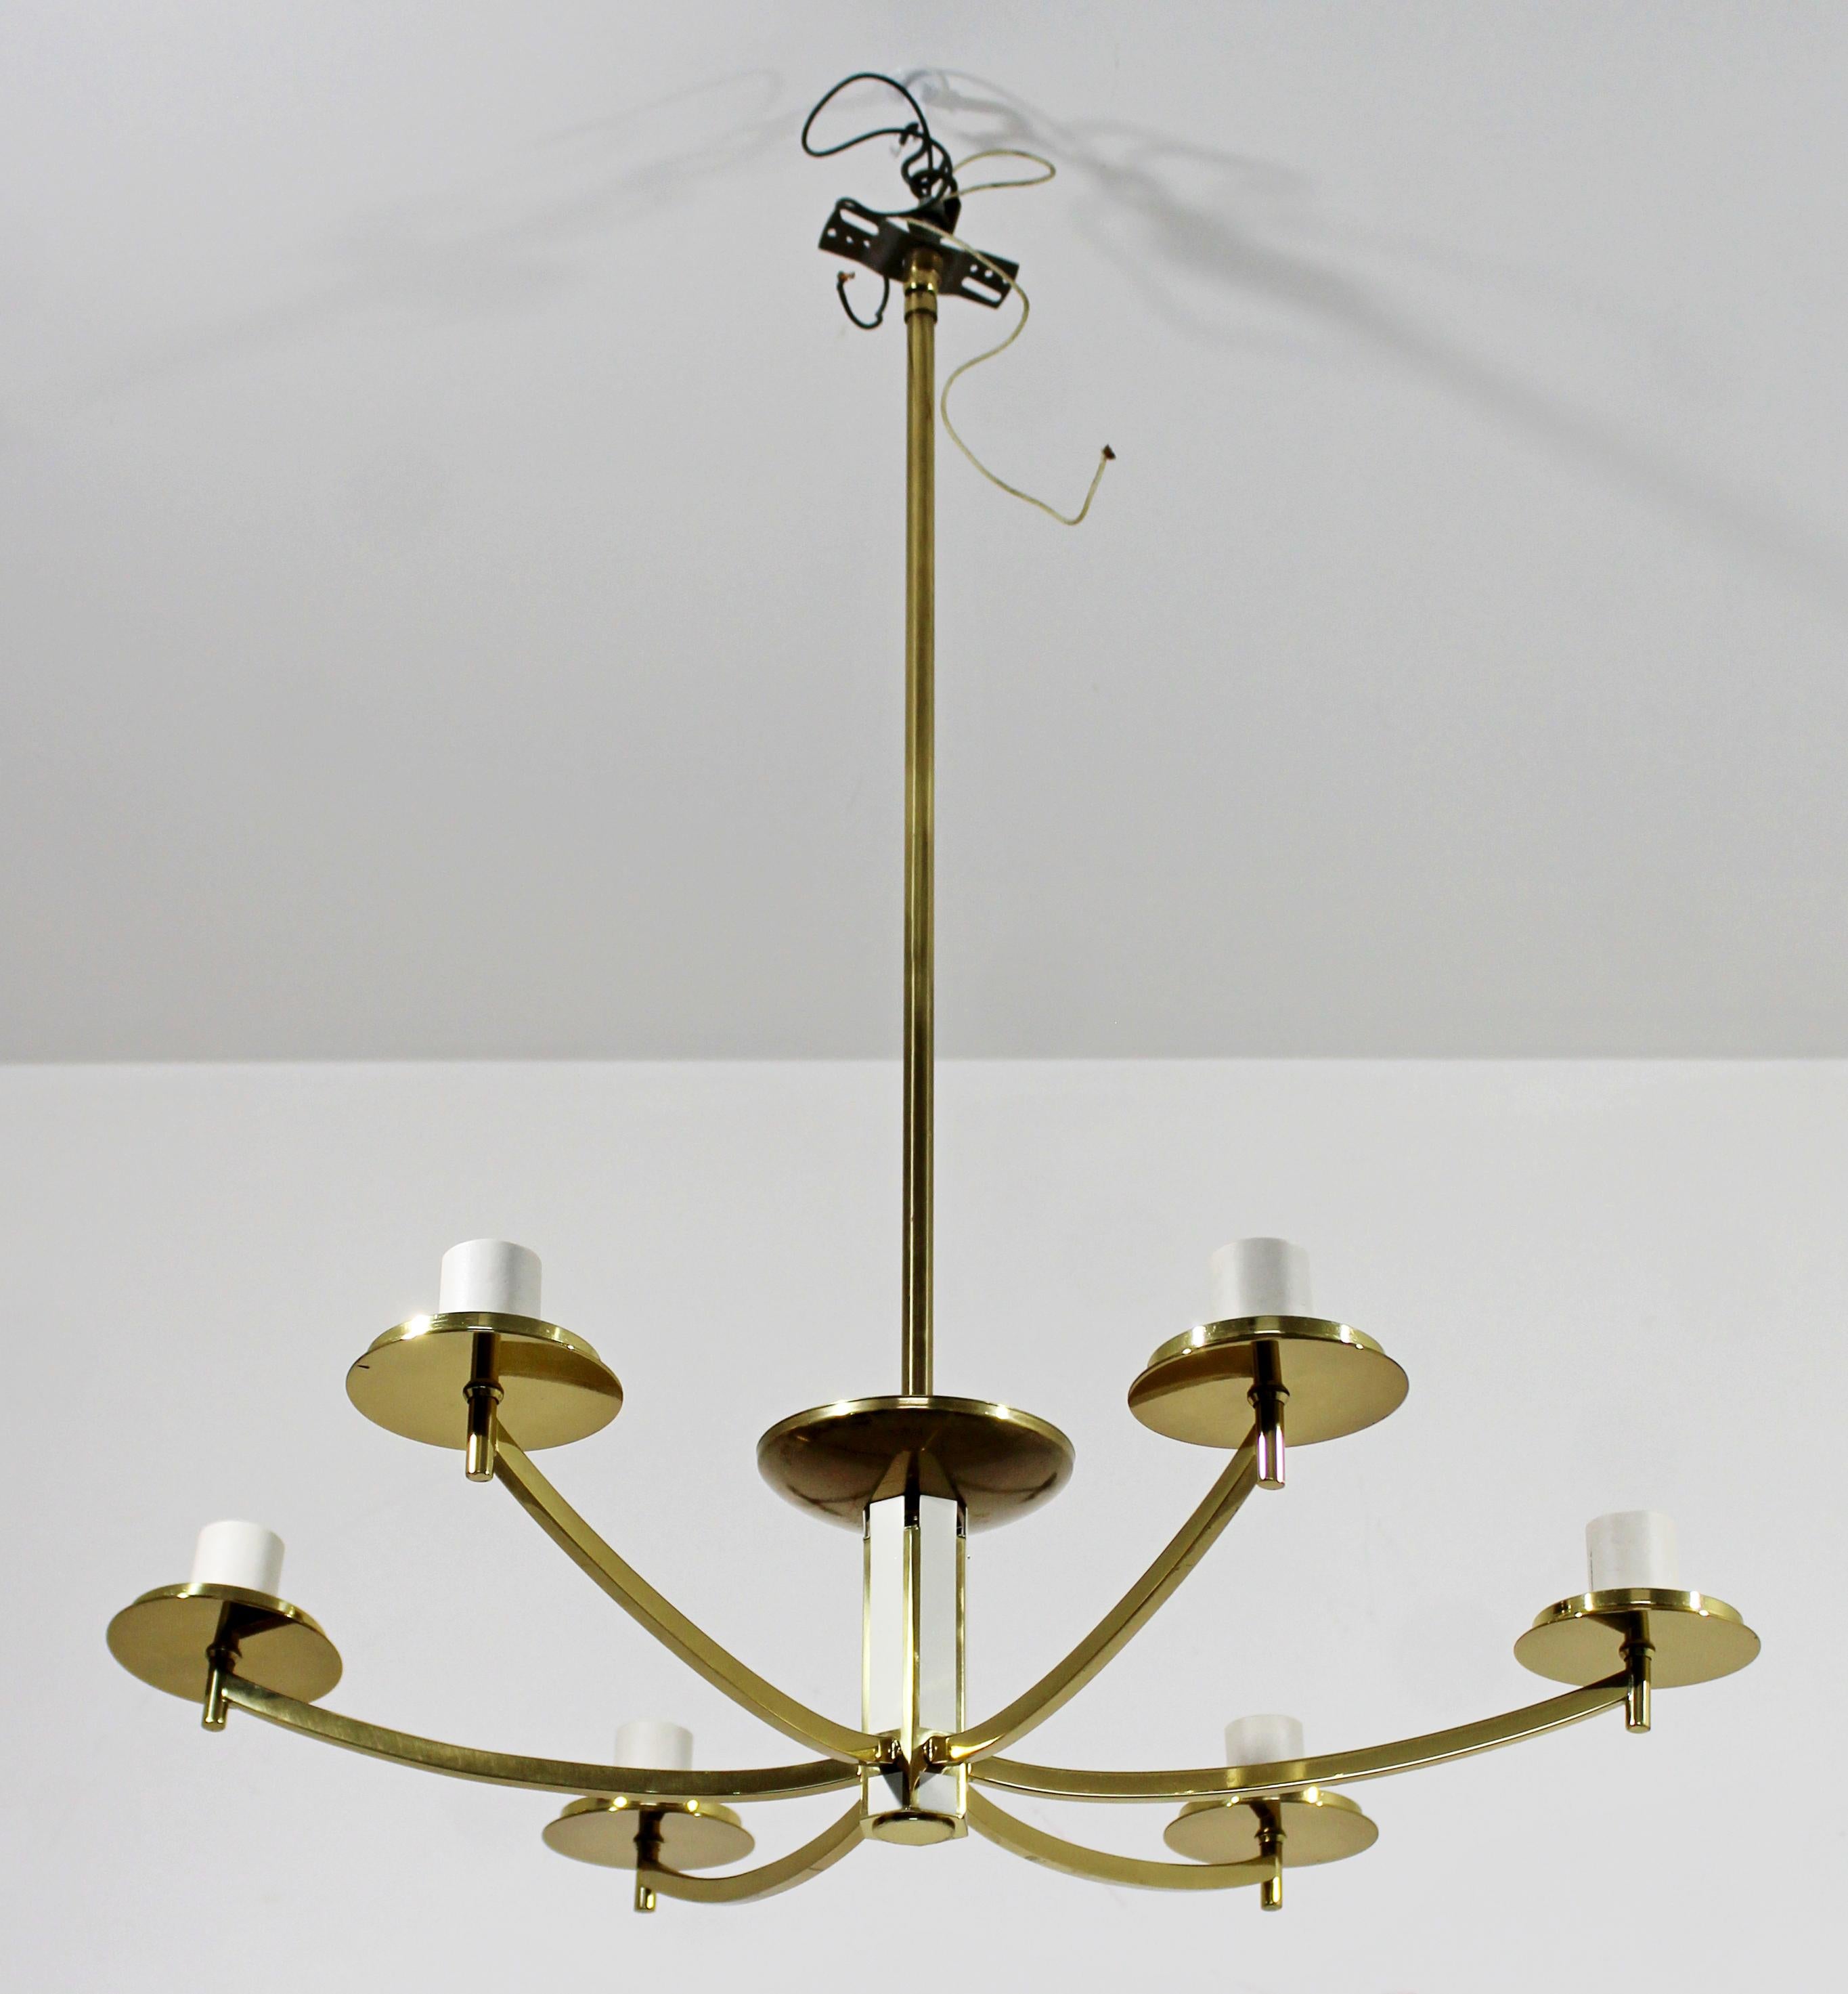 For your consideration is a classically vintage, white enameled brass, six-arm chandelier, circa 1960s-1970s. In excellent vintage condition. The dimensions are 26